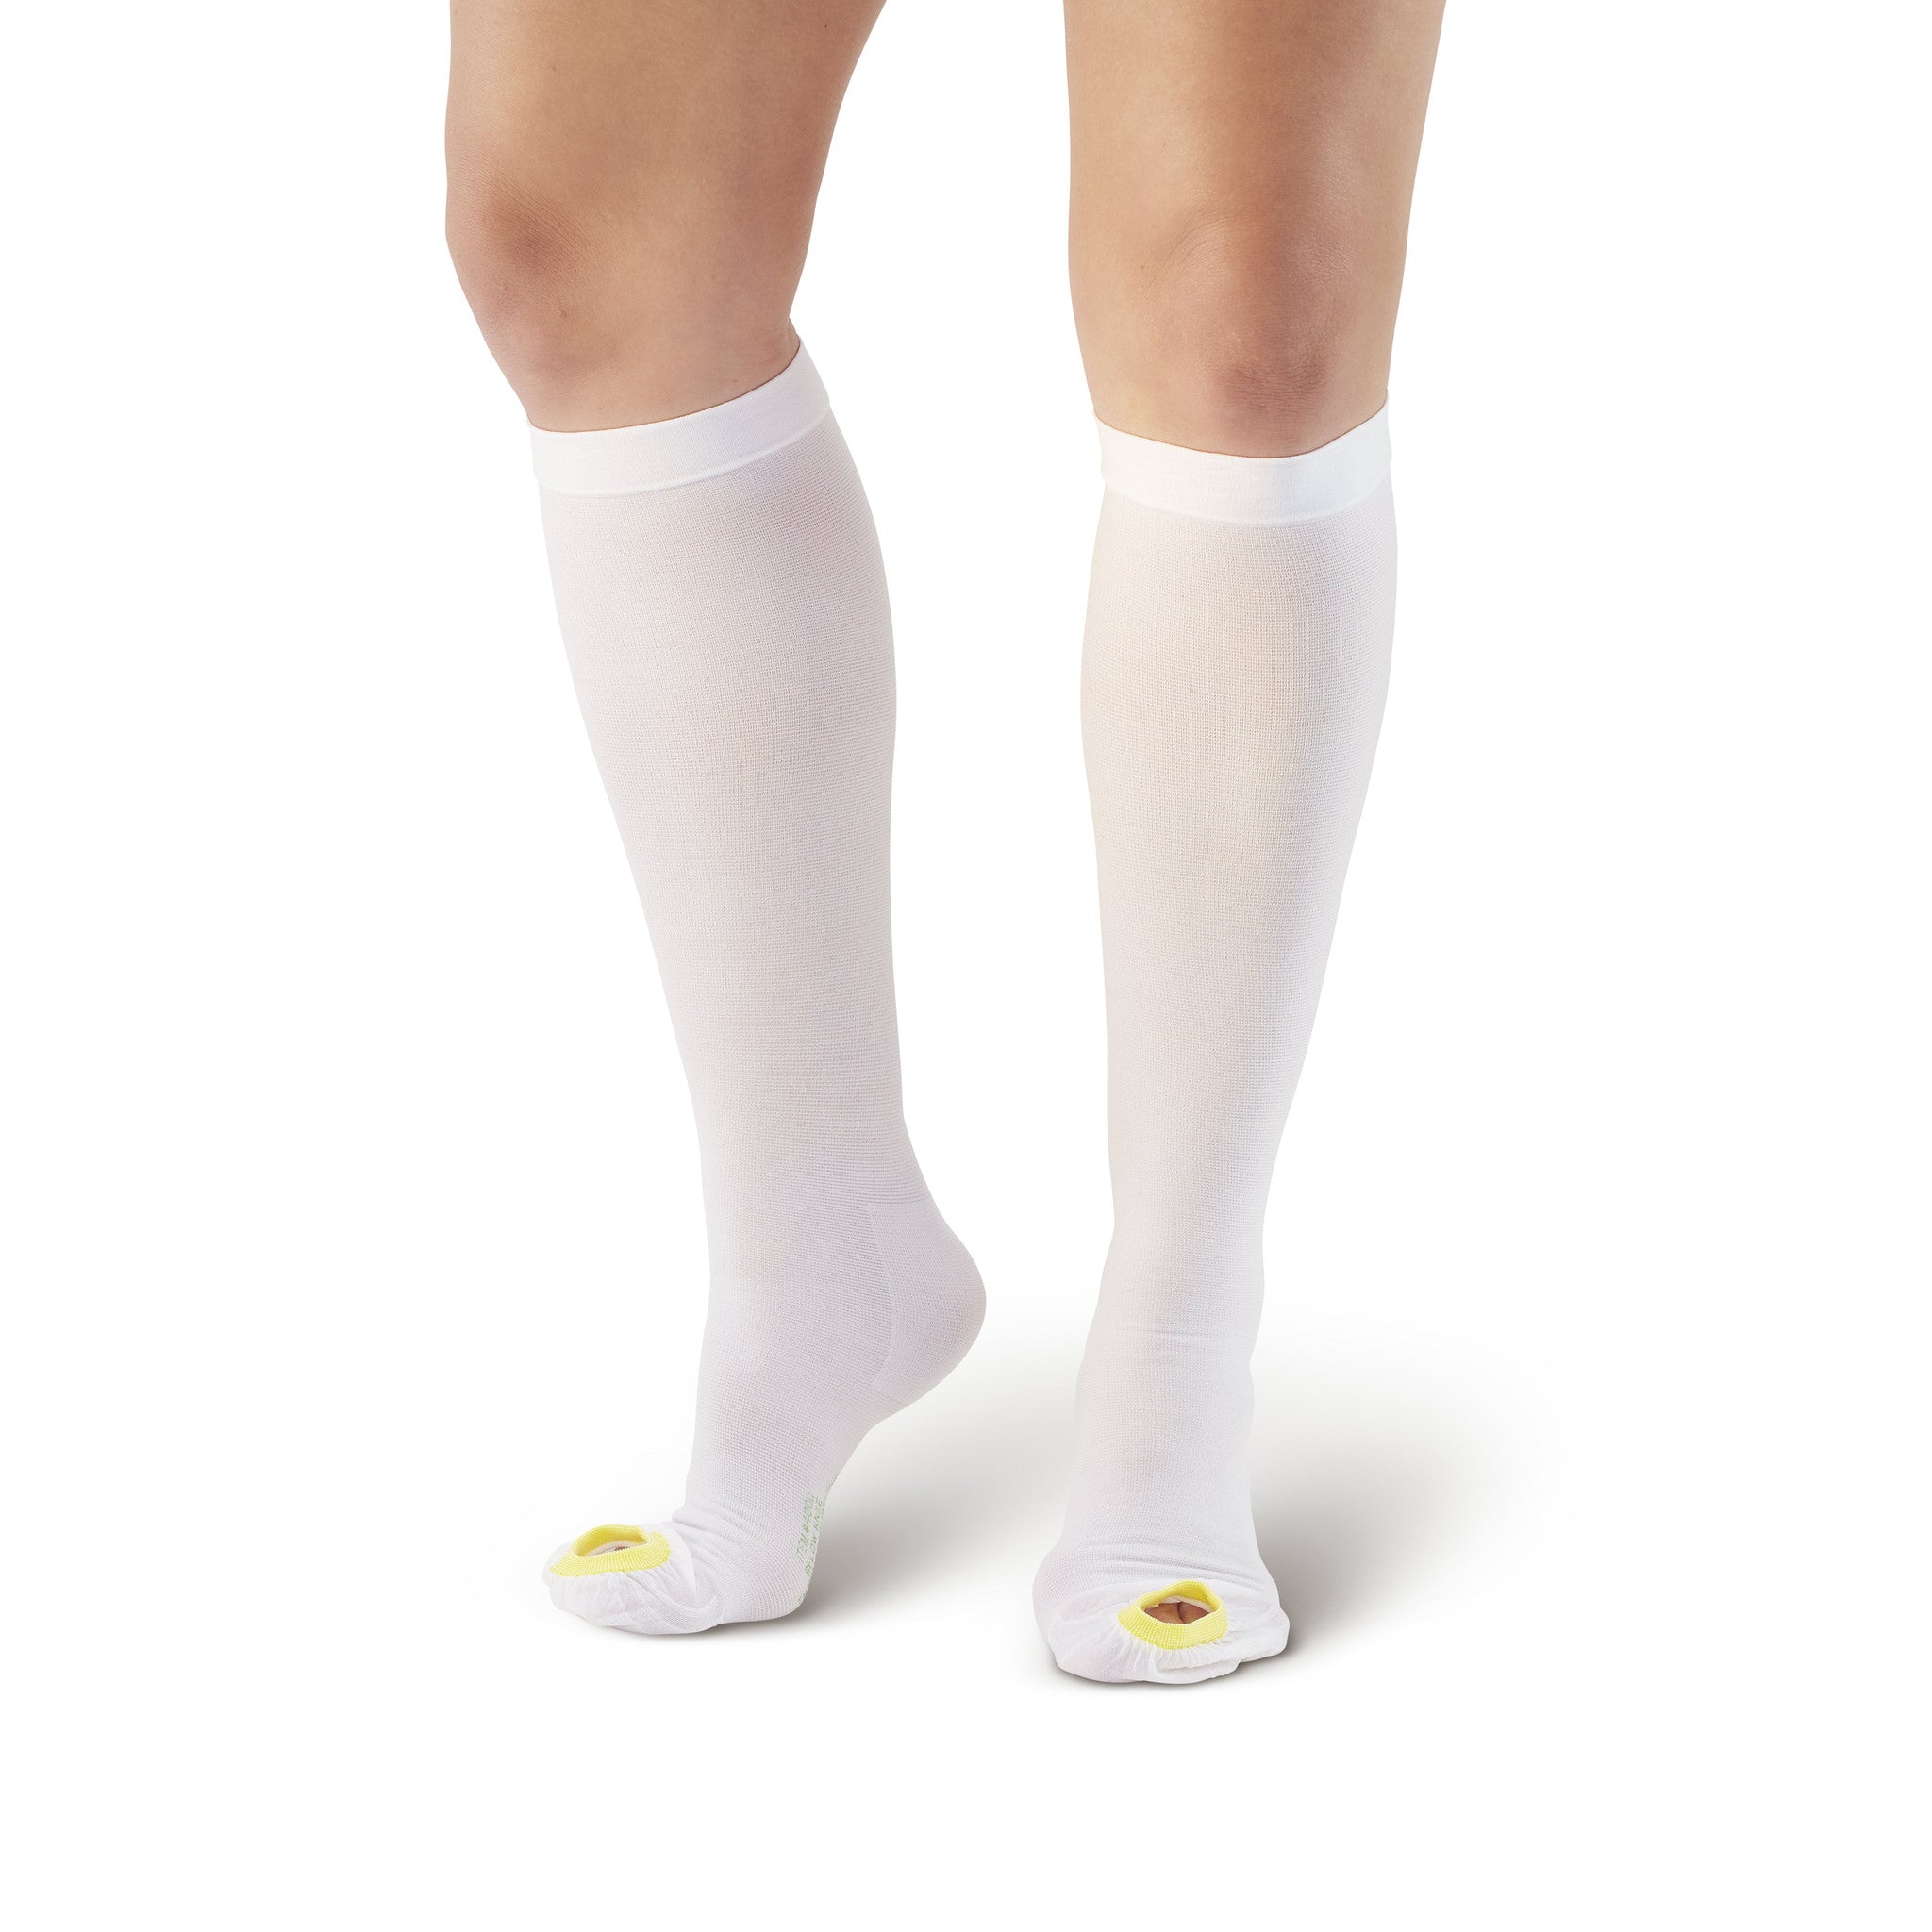 Activa Anti-Embolism Stockings Thigh or Knee High Compression